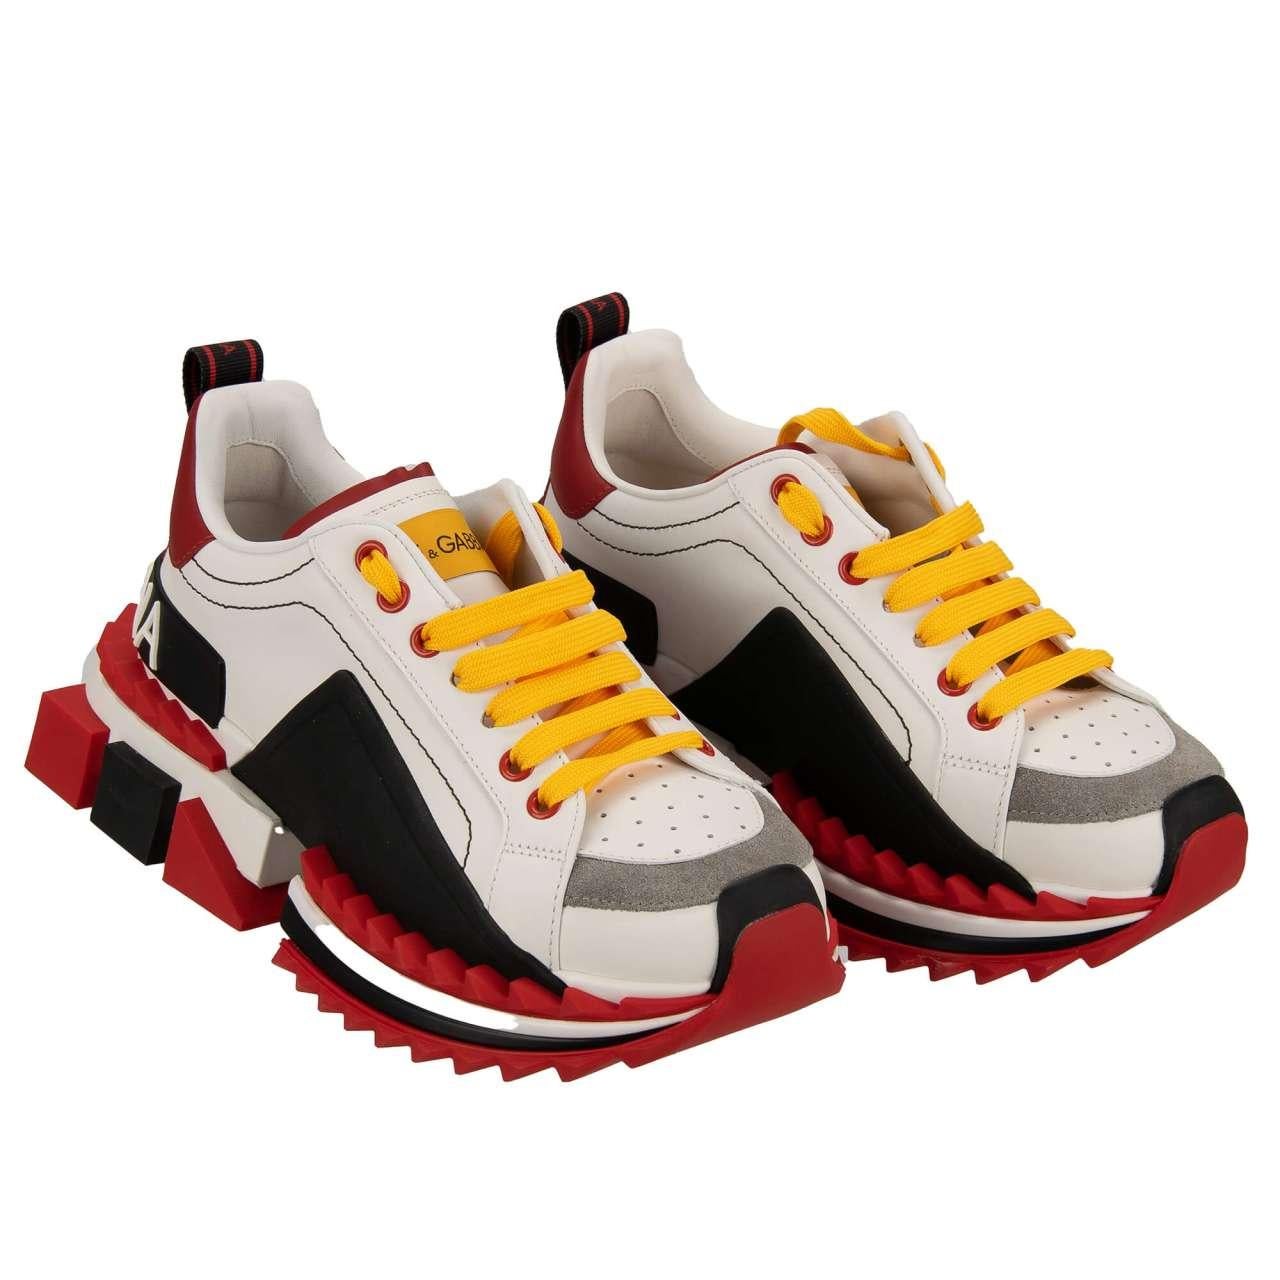 - Lace Sneaker SUPER QUEEN with plateau and DG logo in red, white and black by DOLCE & GABBANA - New with Box - MADE IN ITALY - Former RRP: EUR 695 - Model: CK1649-AZ6921-89926 - Material: 100% Calf leather - Sole: Rubber - Color: White / Red /